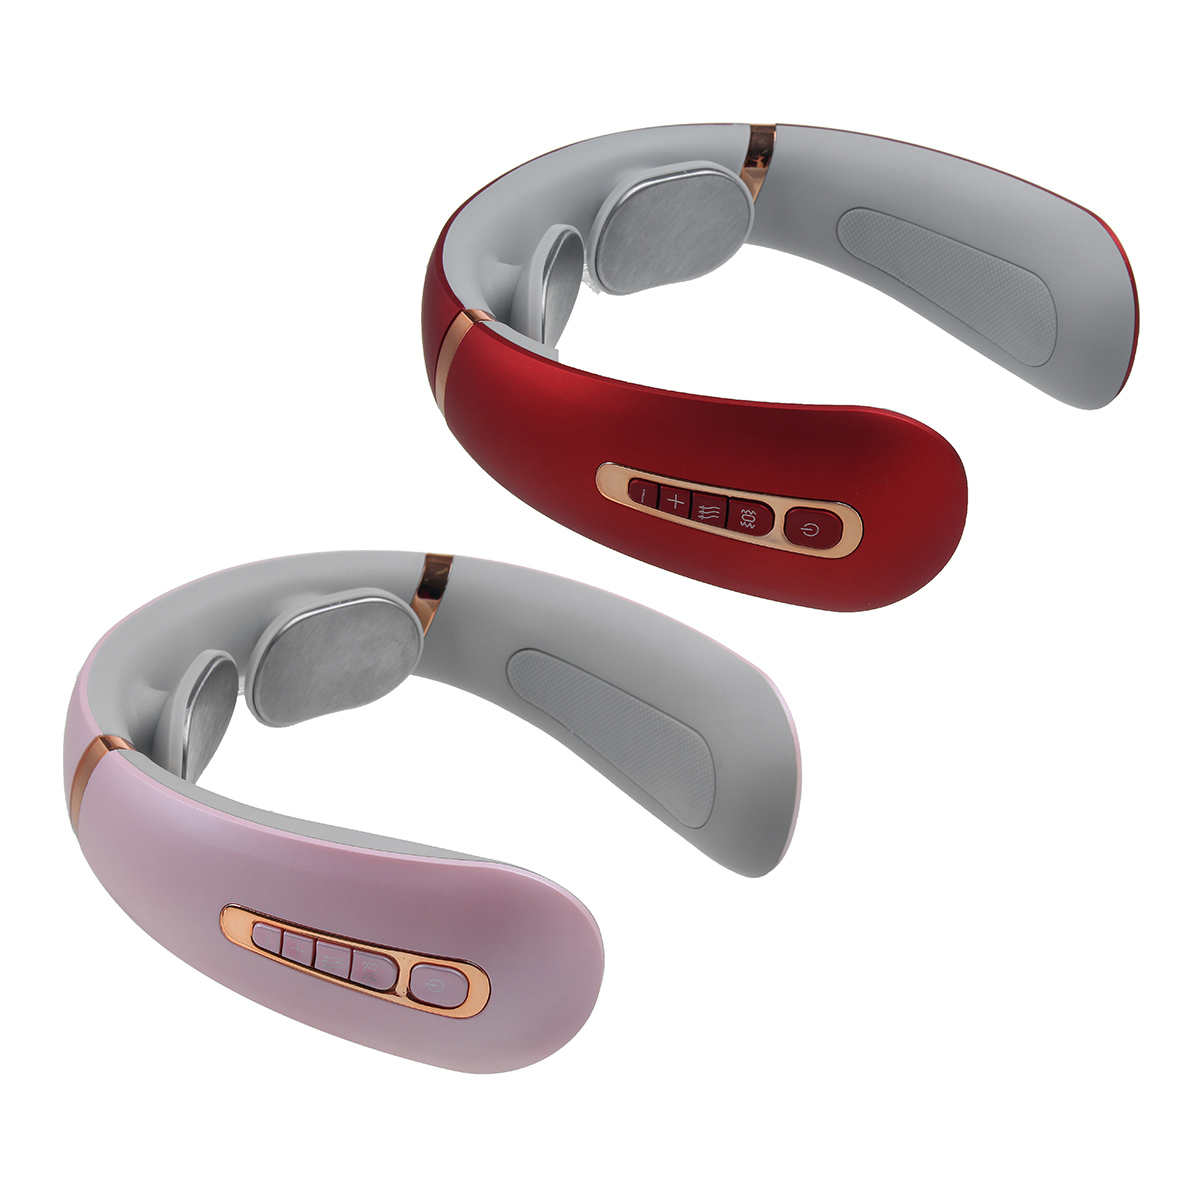 USB-Electric-Heating-Pulse-Neck-Massager-Magnetic-Pulse-Therapy-Relax-Vertebra-Treatment-1810137-3